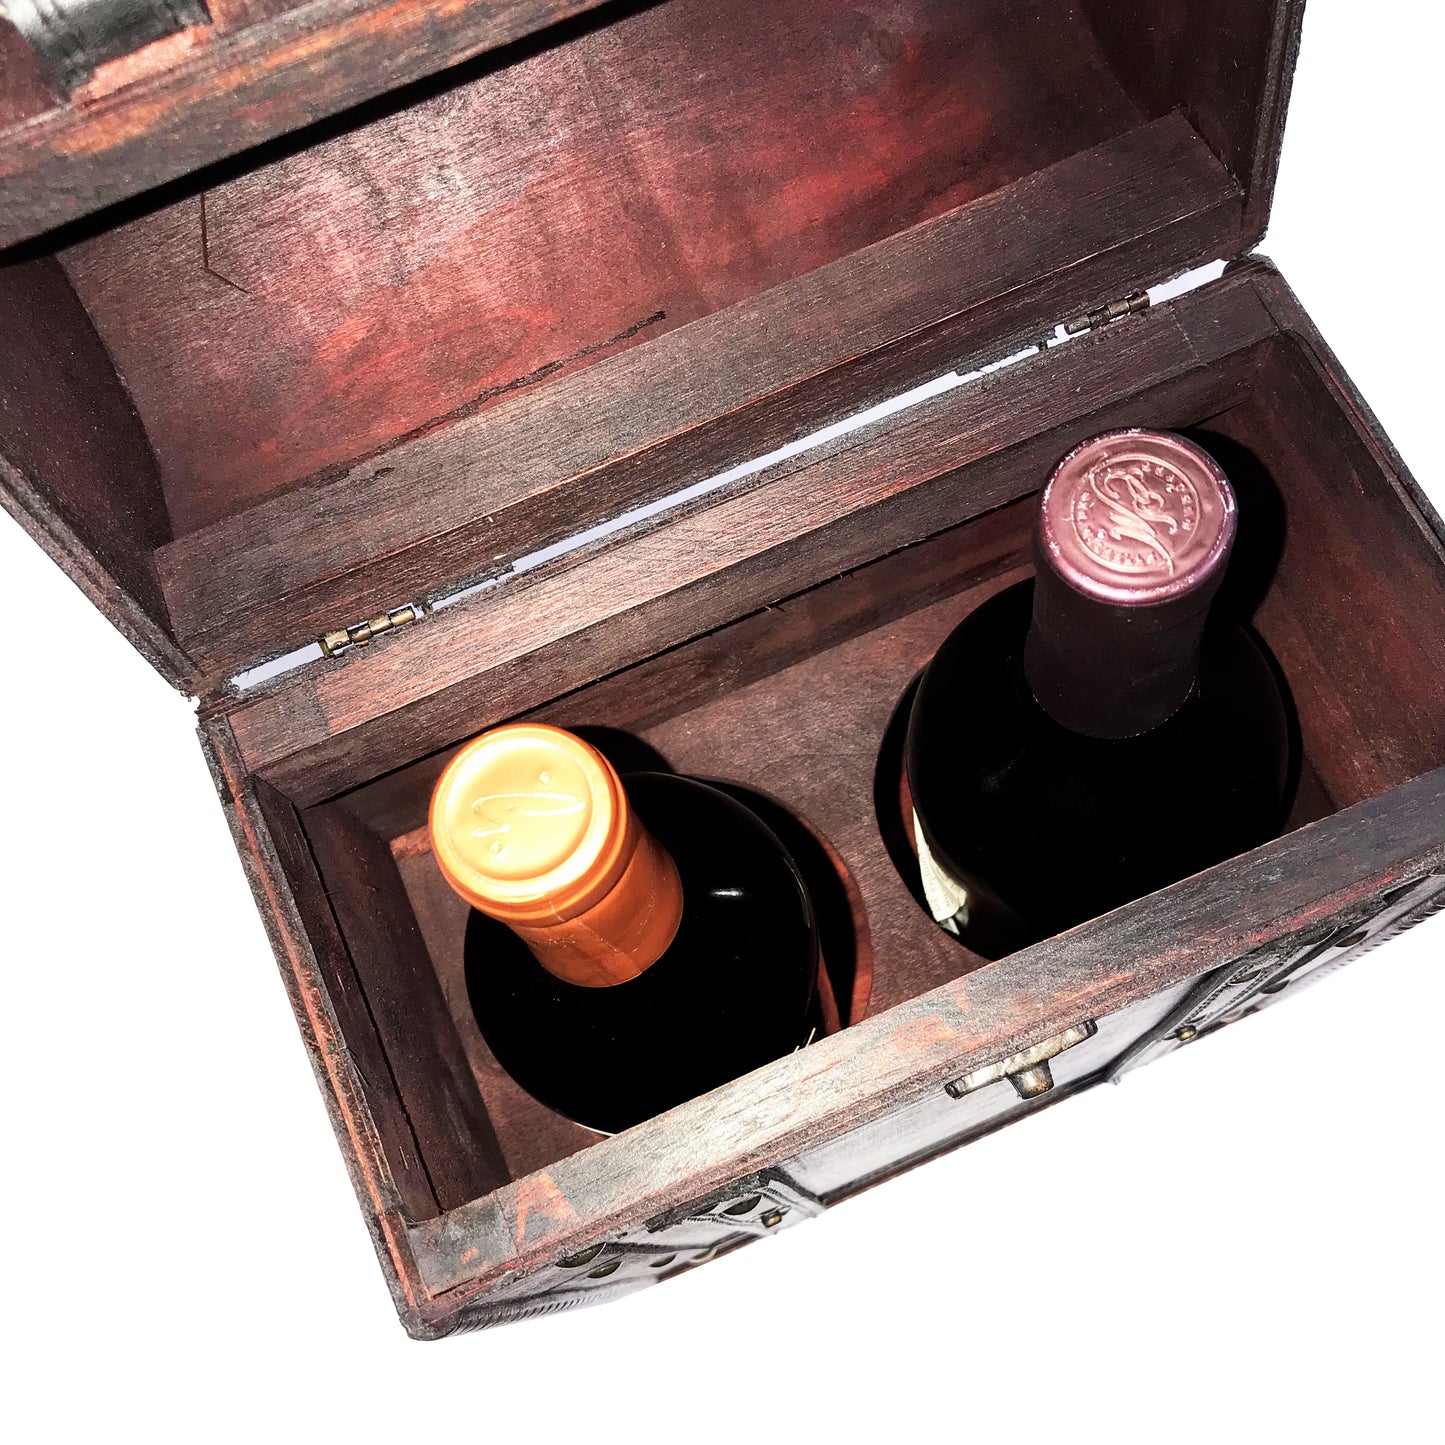 Allgala Wooden Wine Box 2-Bottle Chest with Antique Finish - HD90201